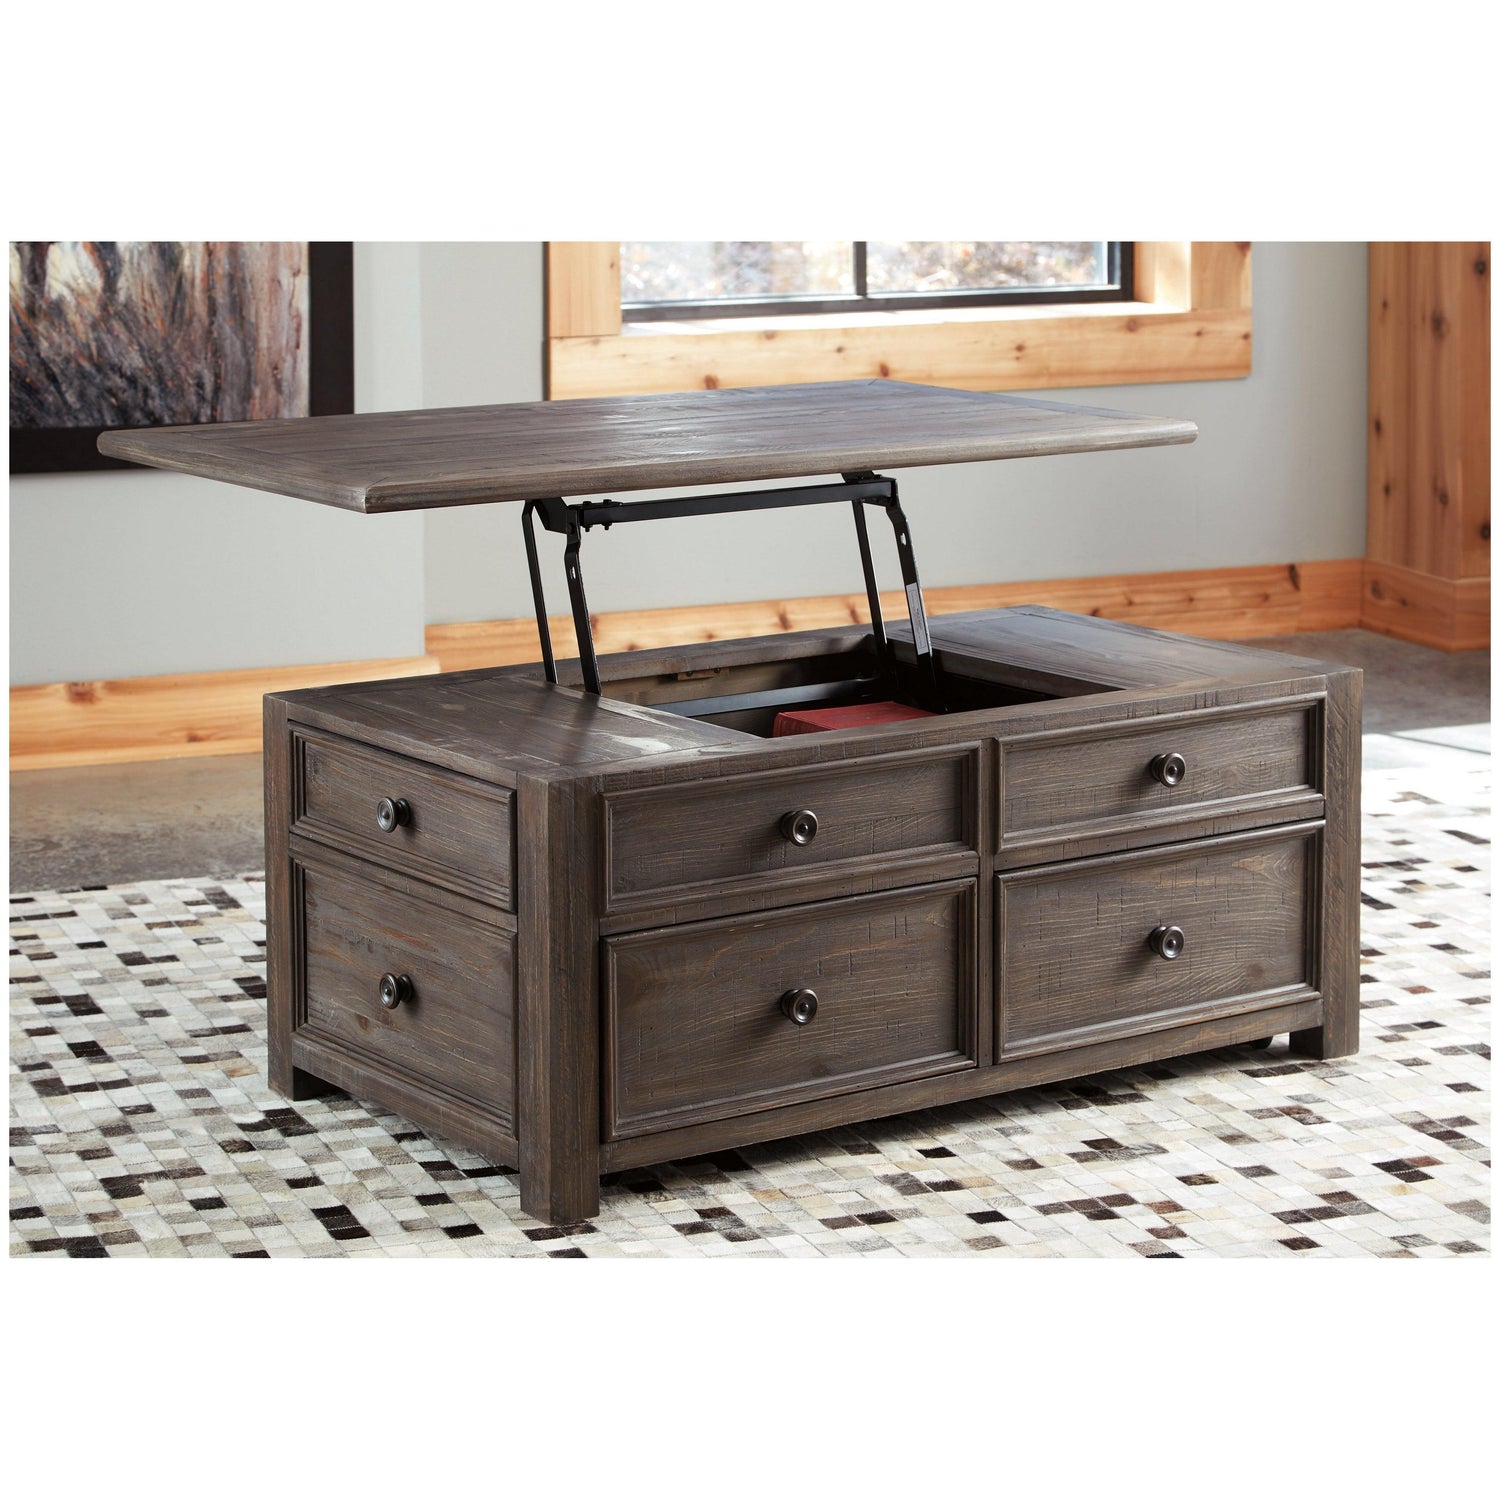 Wyndahl Coffee Table with Lift Top Ash-T648-20